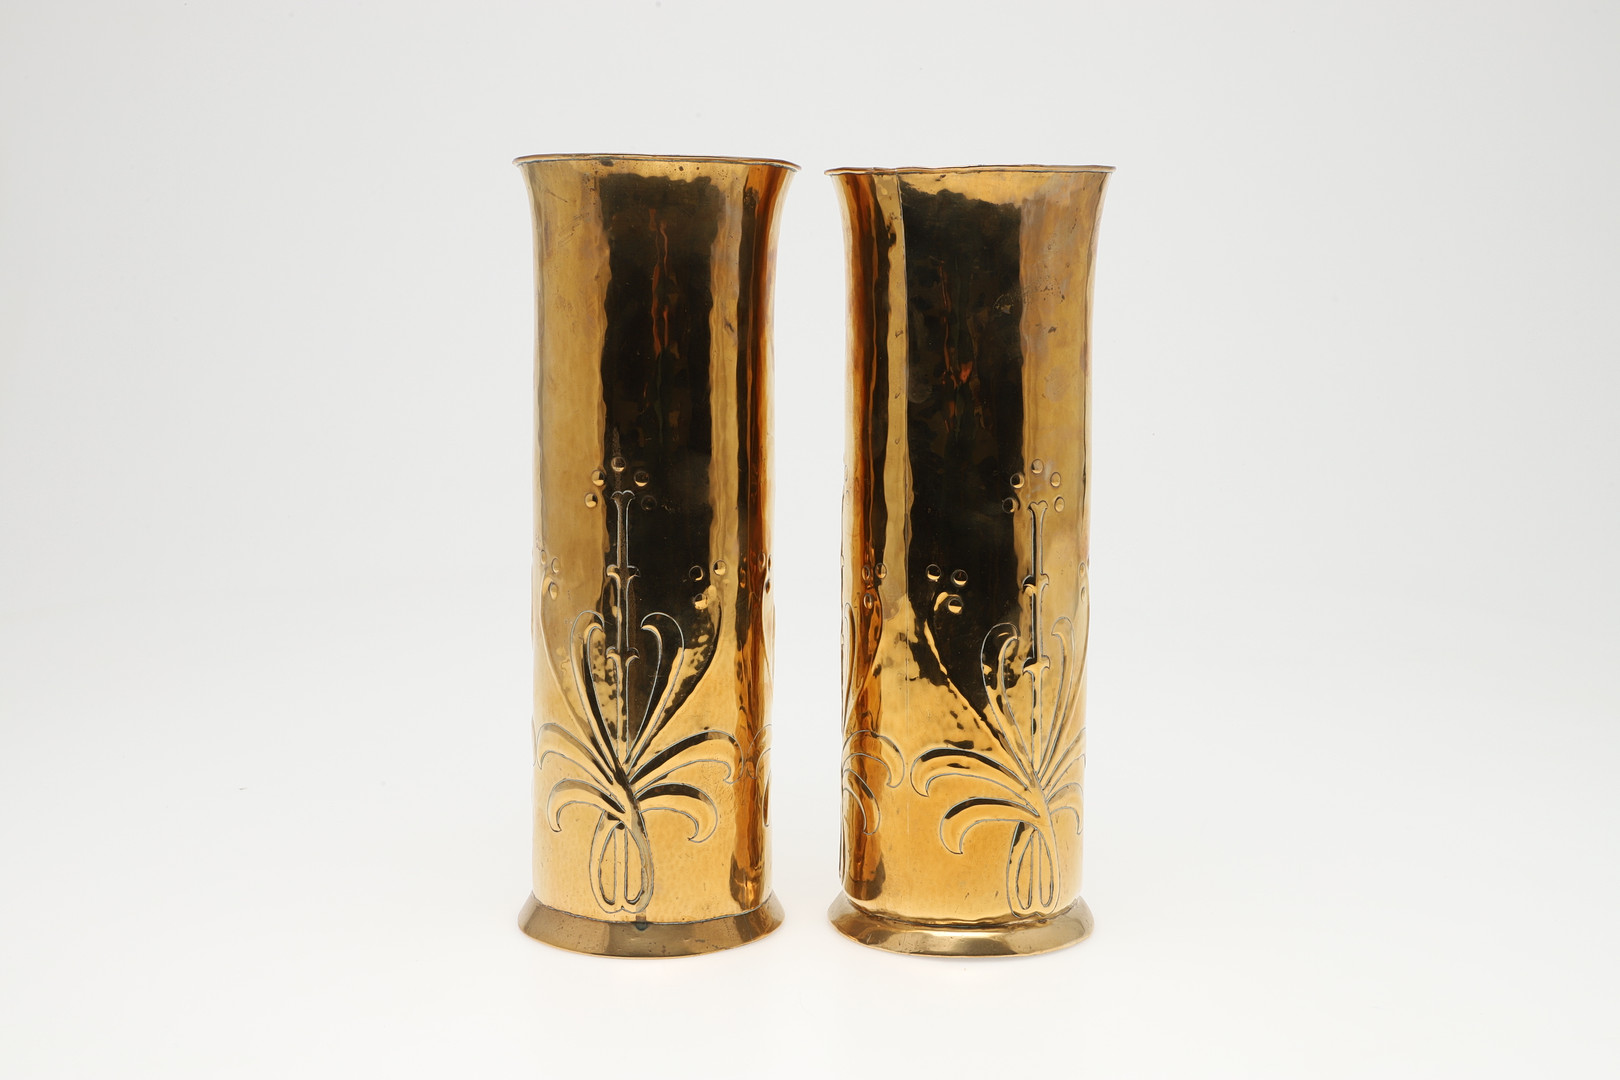 LARGE PAIR OF KESWICK ARTS & CRAFTS BRASS VASES. - Image 4 of 8